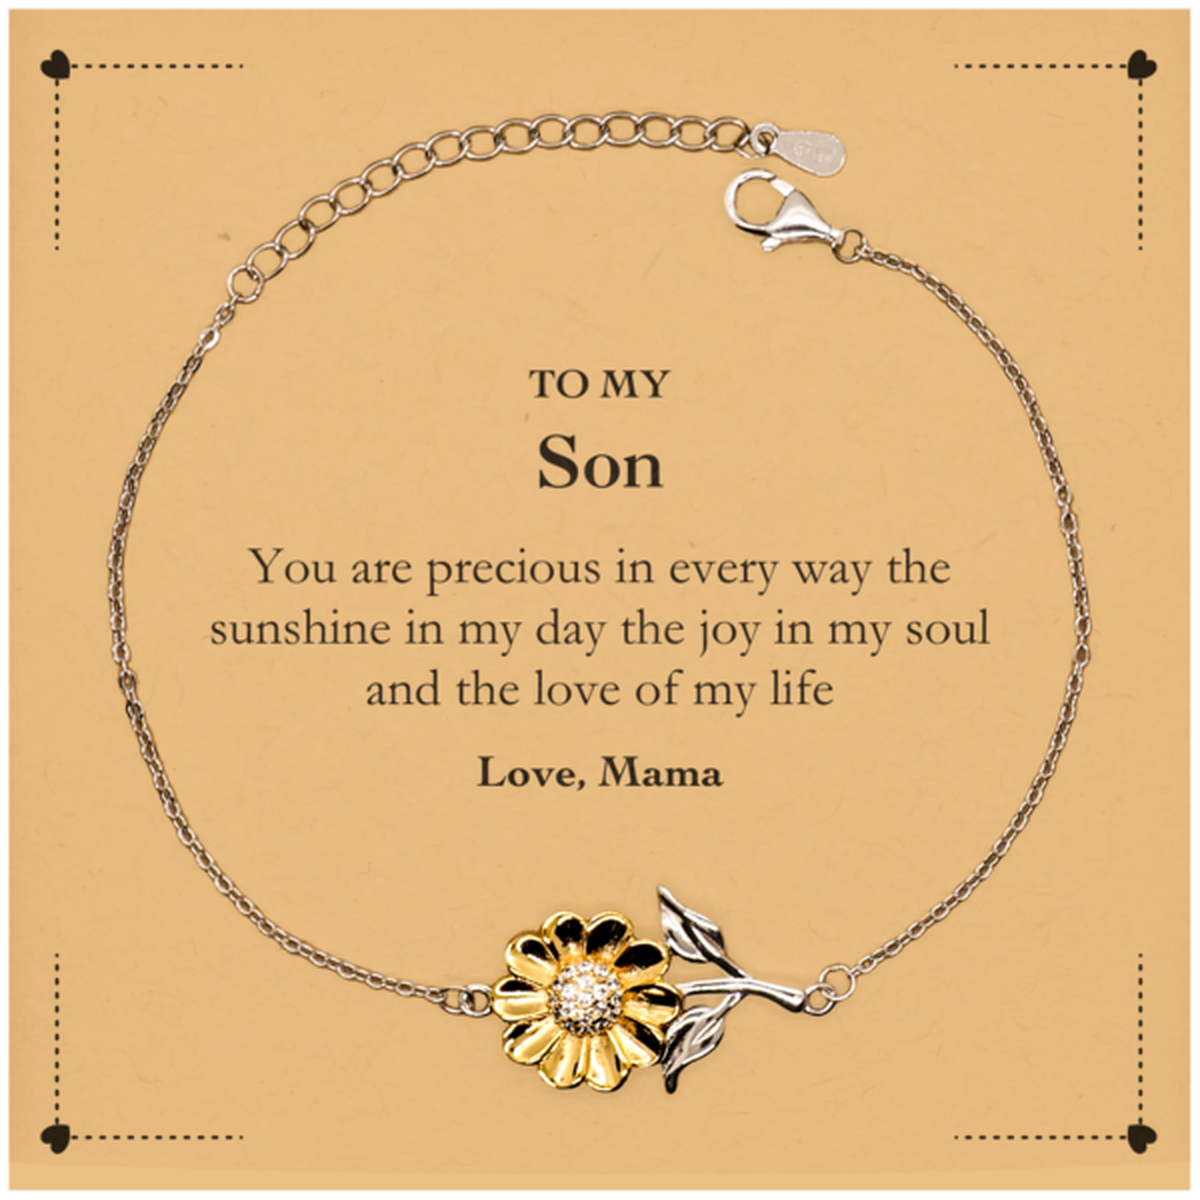 Graduation Gifts for Son Sunflower Bracelet Present from Mama, Christmas Son Birthday Gifts Son You are precious in every way the sunshine in my day. Love, Mama